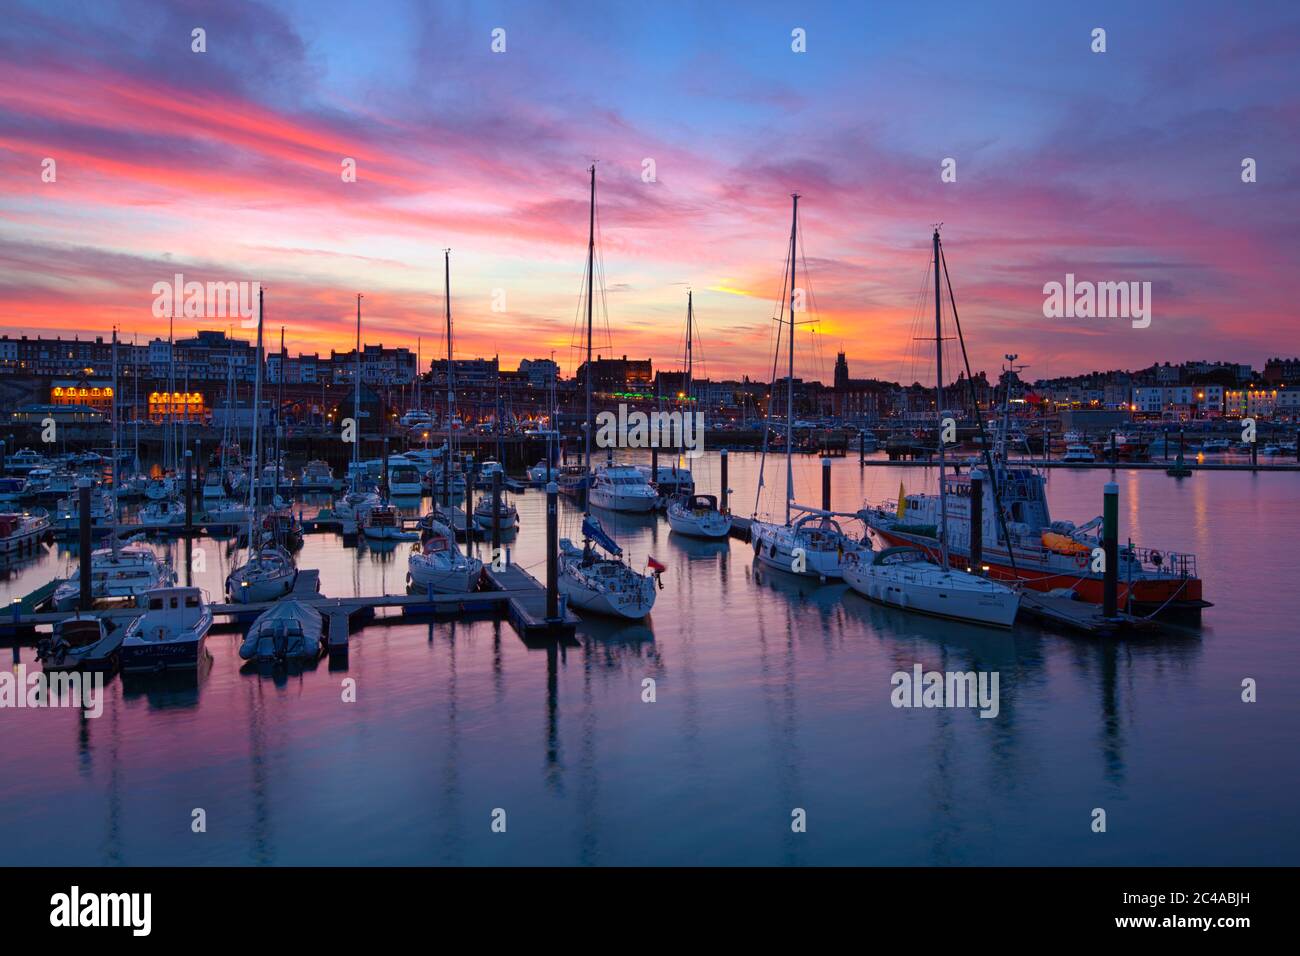 The harbour at sunset, Ramsgate, Kent, England, United Kingdom, Europe Stock Photo